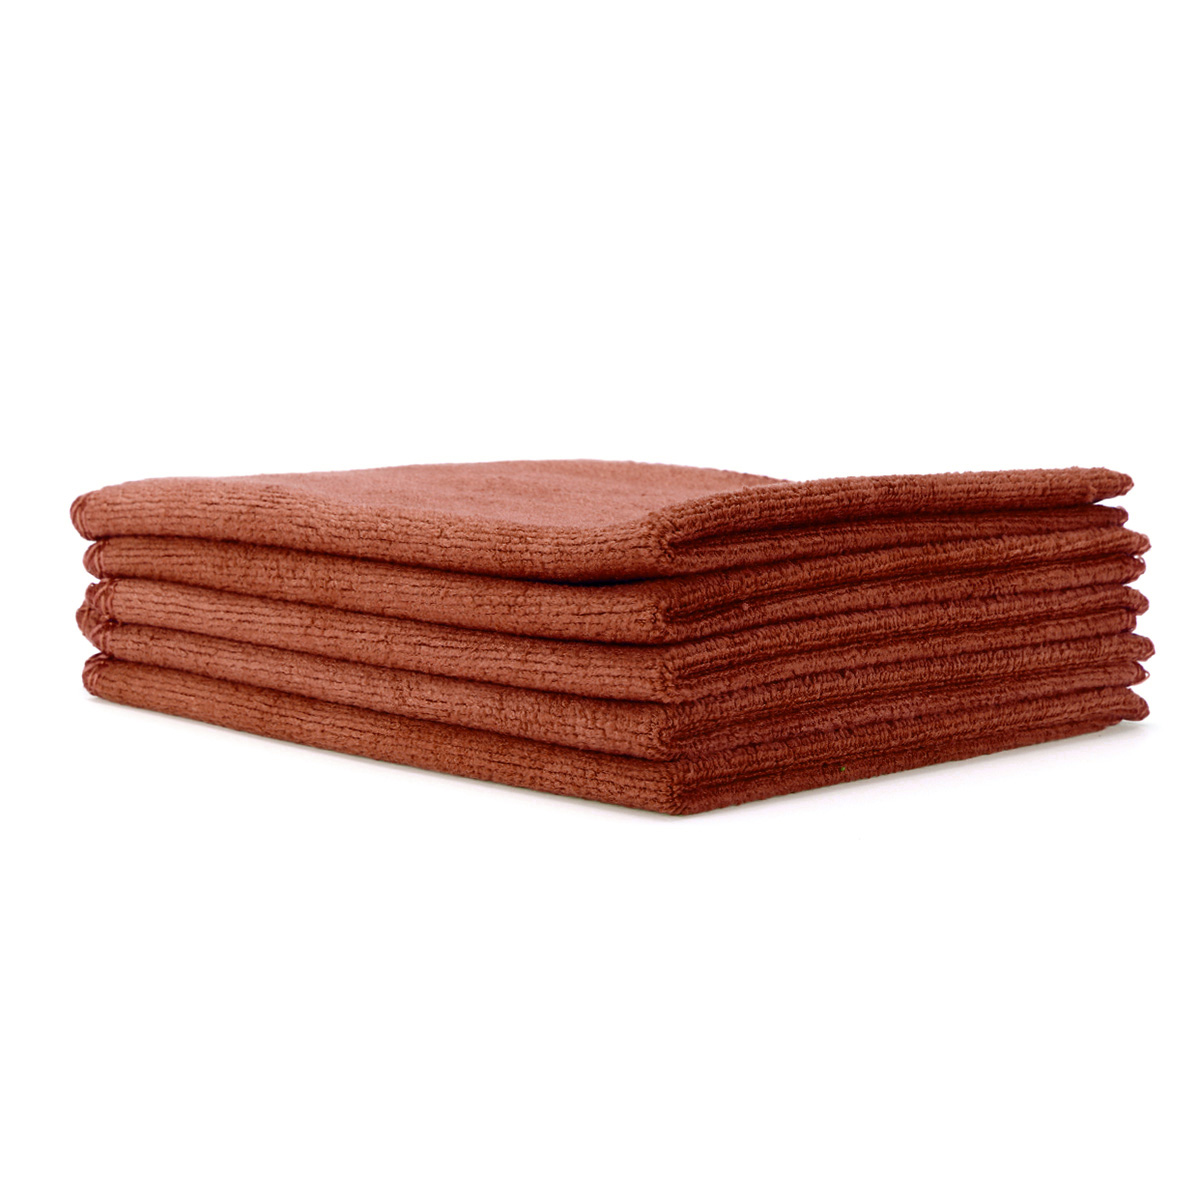 30*30Cm Thickening and Polishing Towel Cloth Microfiber Cleaning Cloths